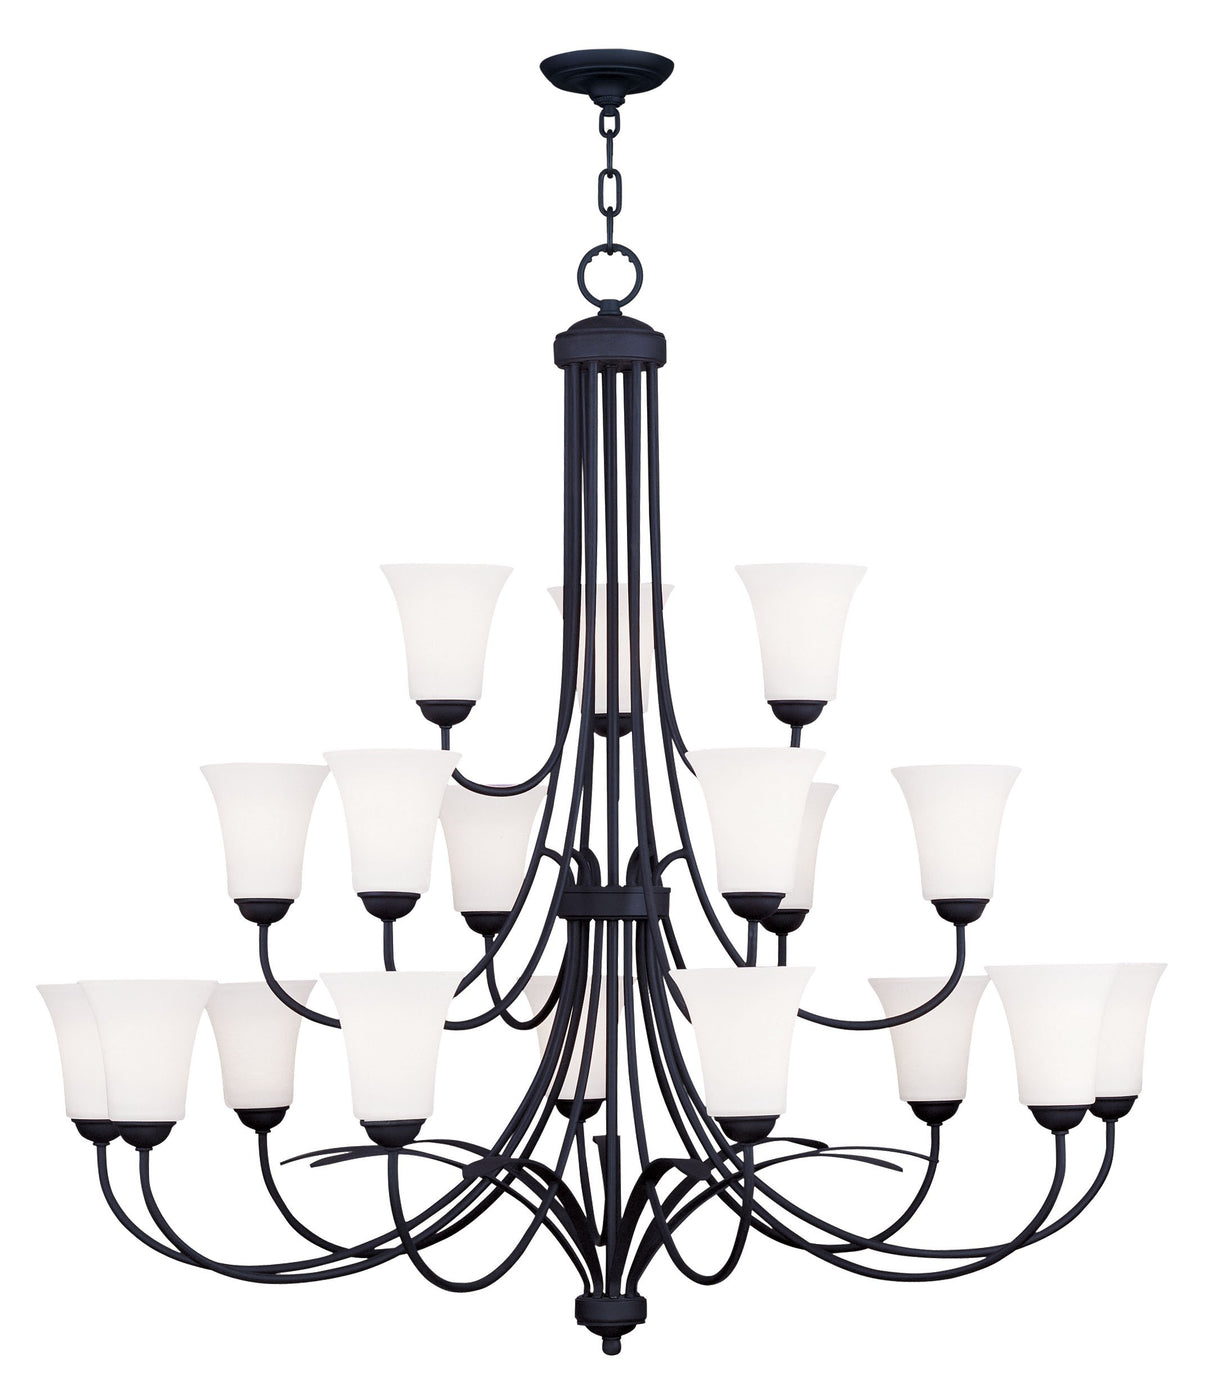 Livex Lighting 6479-04 Transitional 18 Light Chandelier from Ridgedale Collection in Black Finish